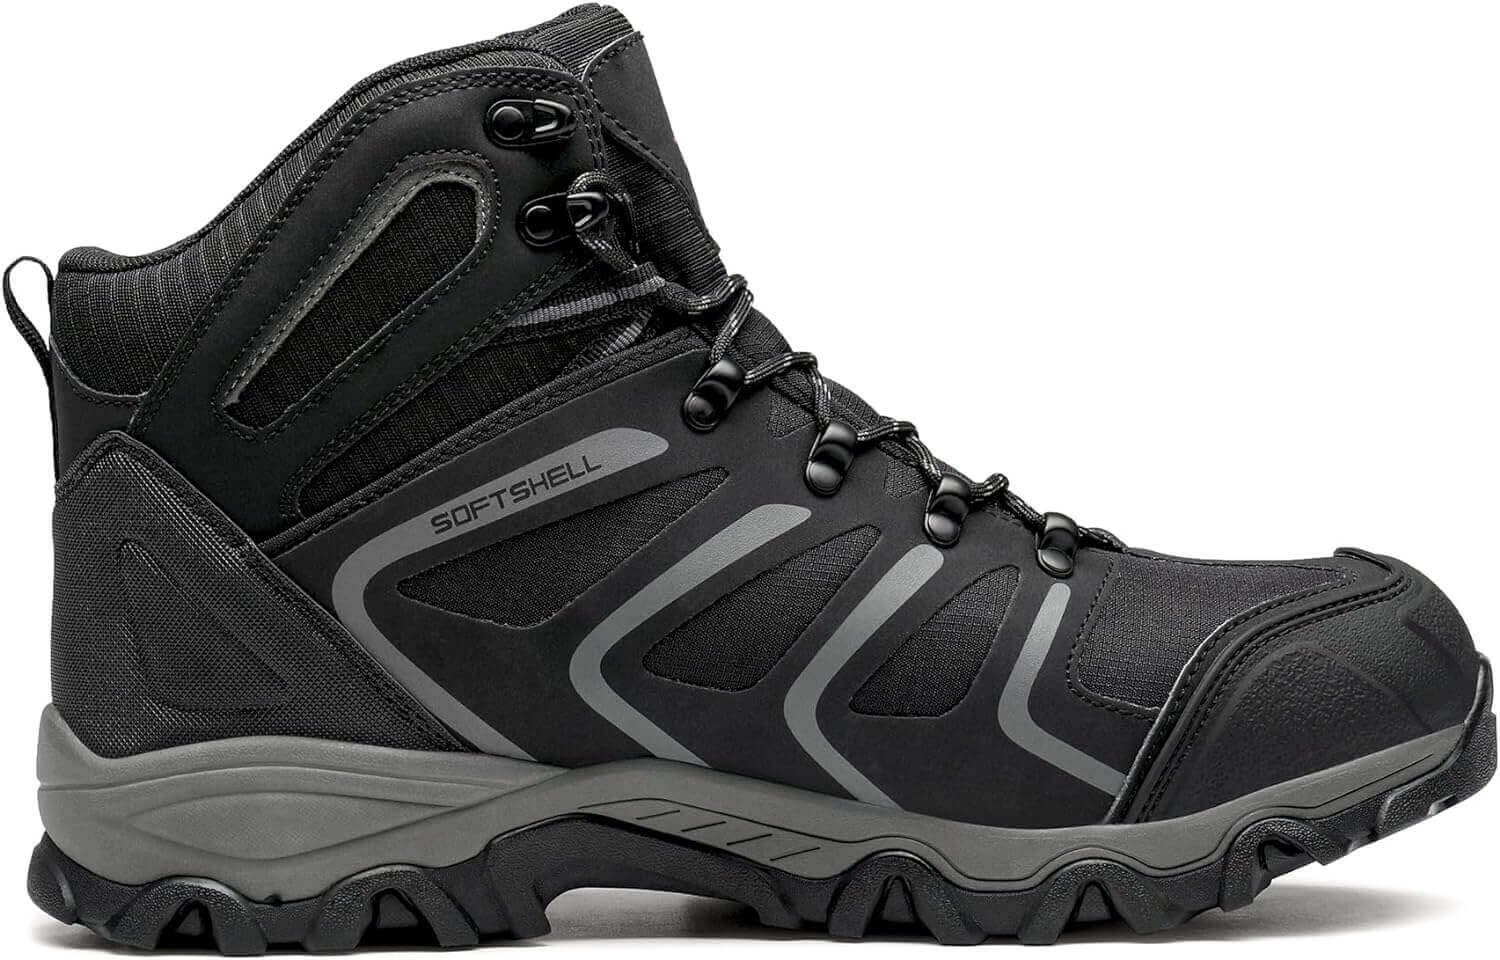 Shop The Latest >NORTIV 8 Men's Ankle High Waterproof Hiking Boots > *Only $92.39*> From The Top Brand > *NORTIV 8l* > Shop Now and Get Free Shipping On Orders Over $45.00 >*Shop Earth Foot*